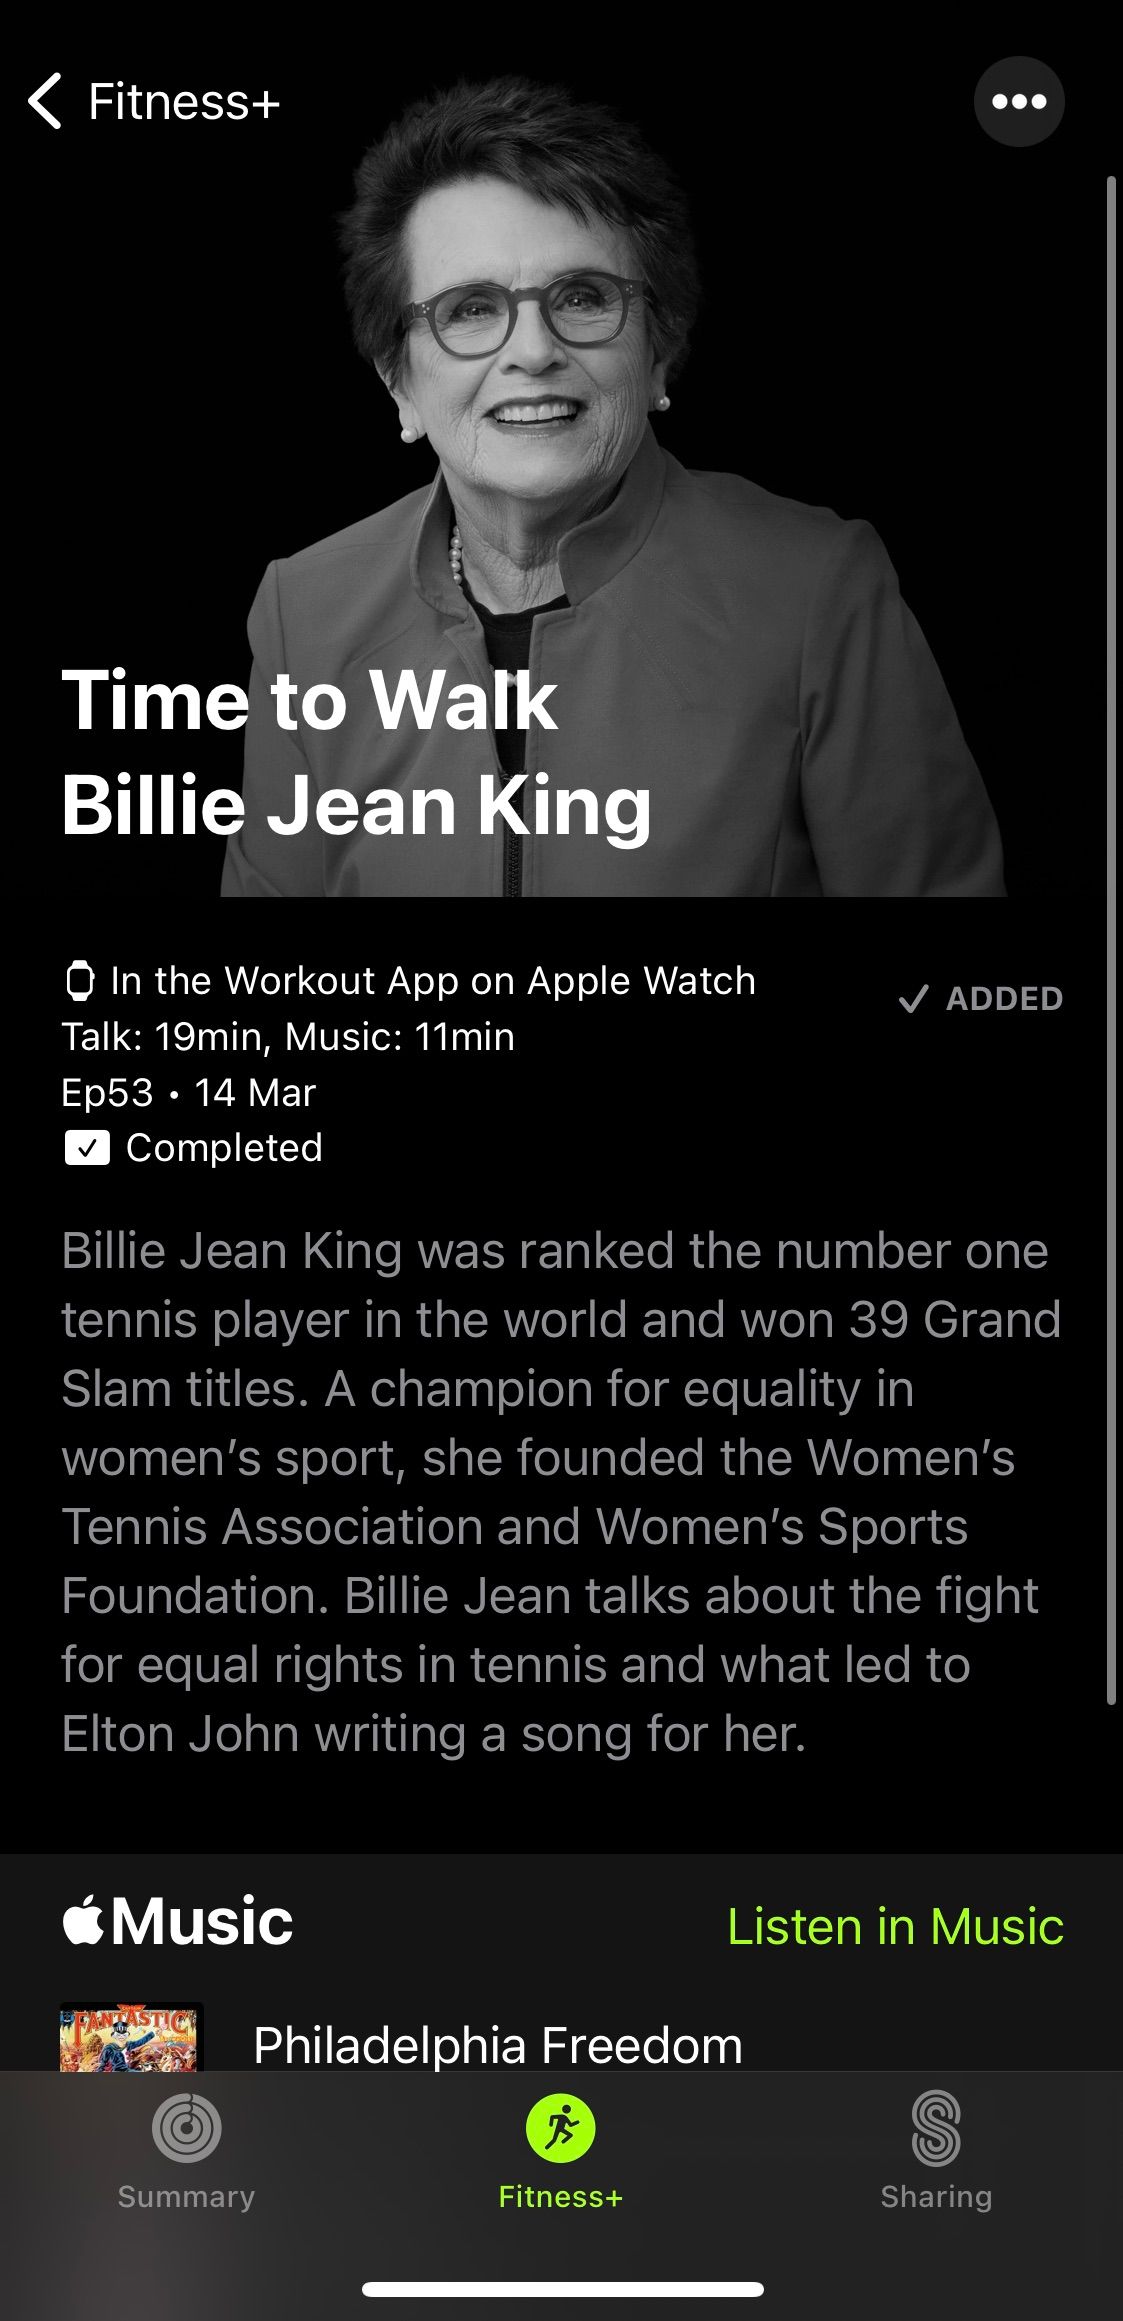 Screenshot from Apple Fitness+ app showing title screen of a Time To Walk workout with Billie Jean King